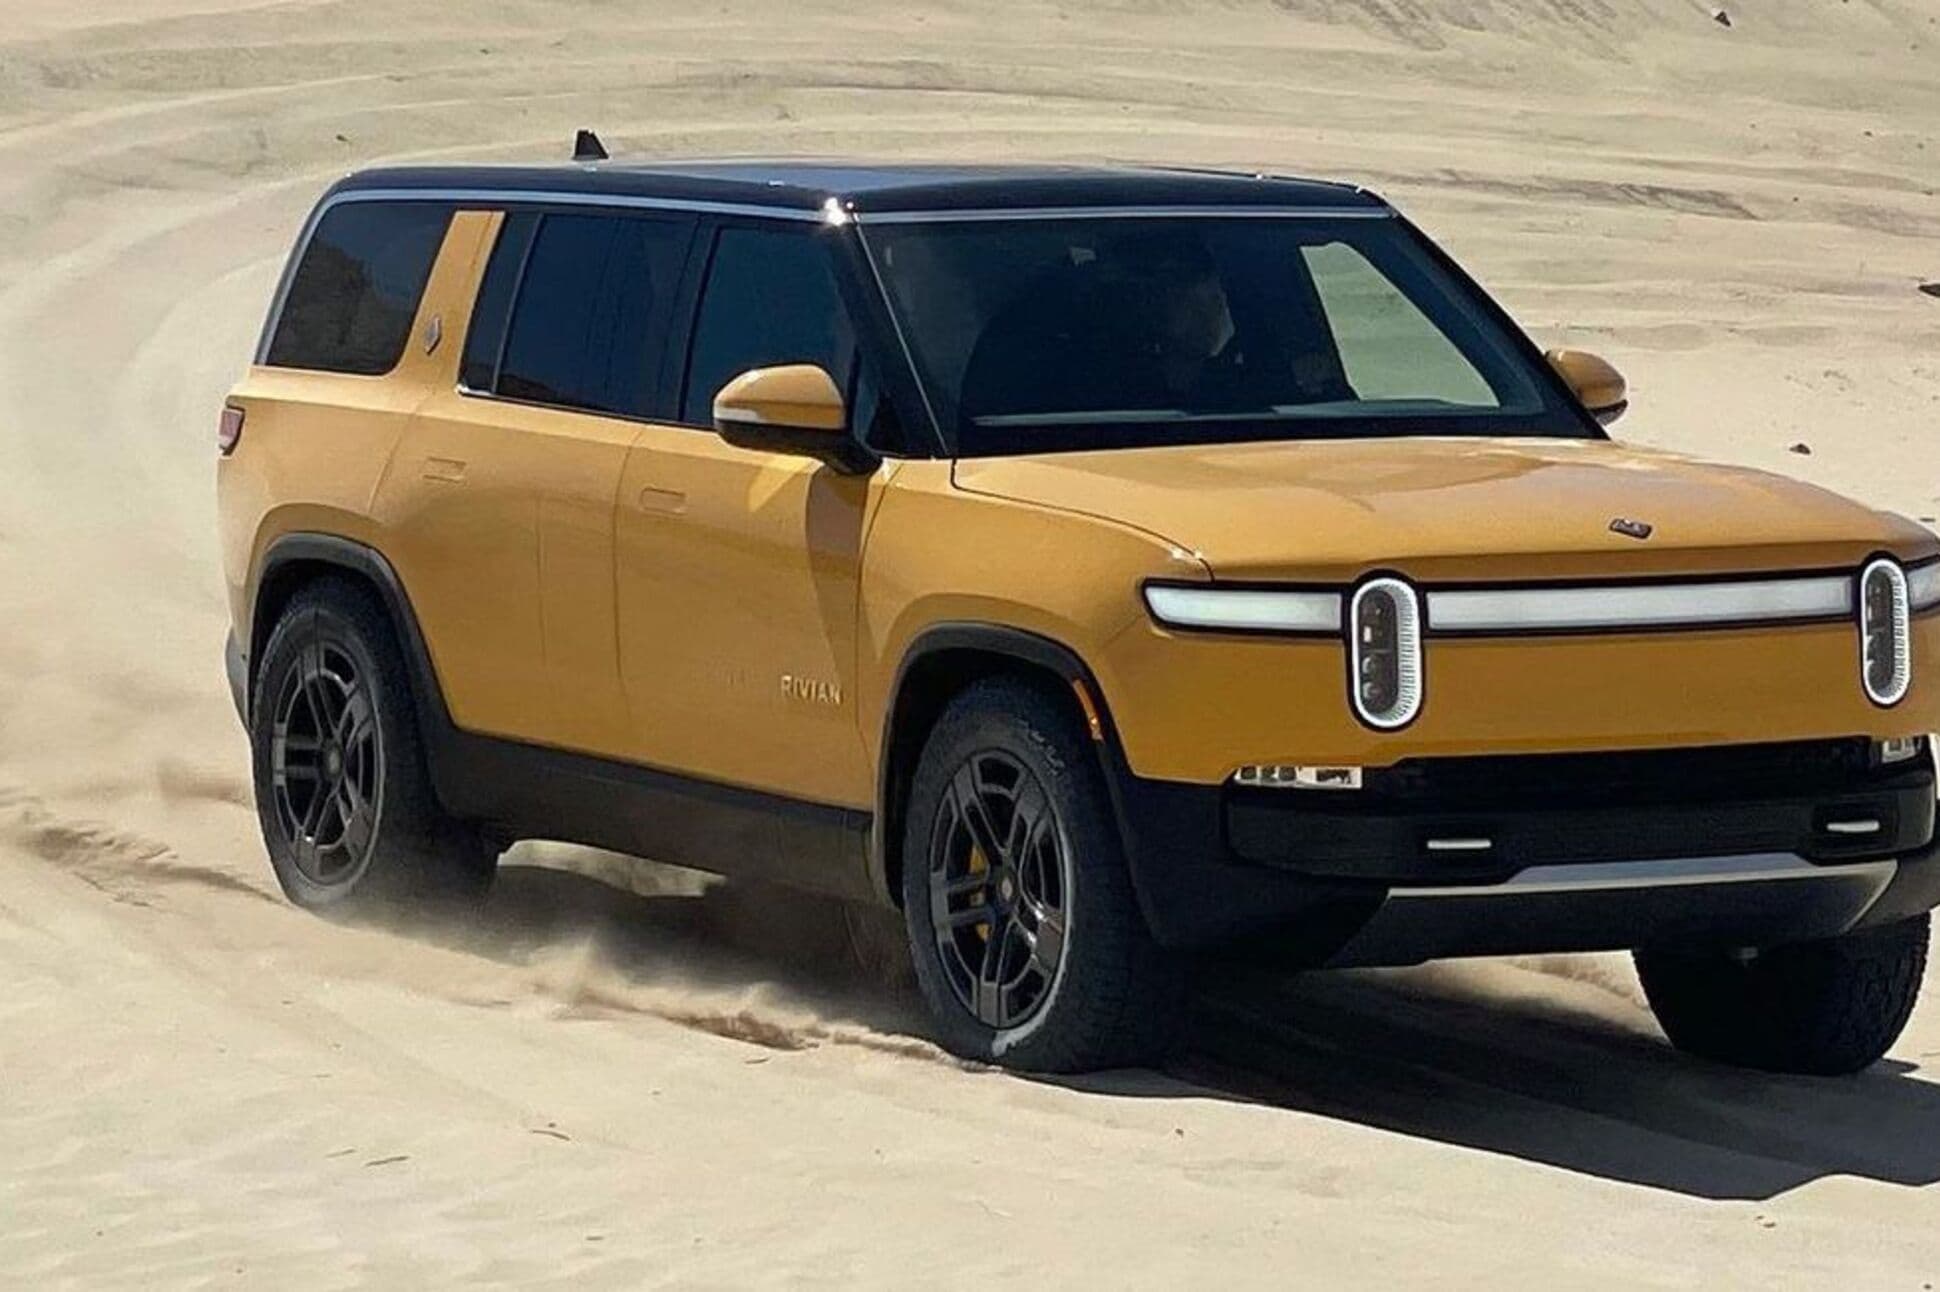 Possible Steering Problems Force Rivian to Recall Almost All of Its Electric Vehicles